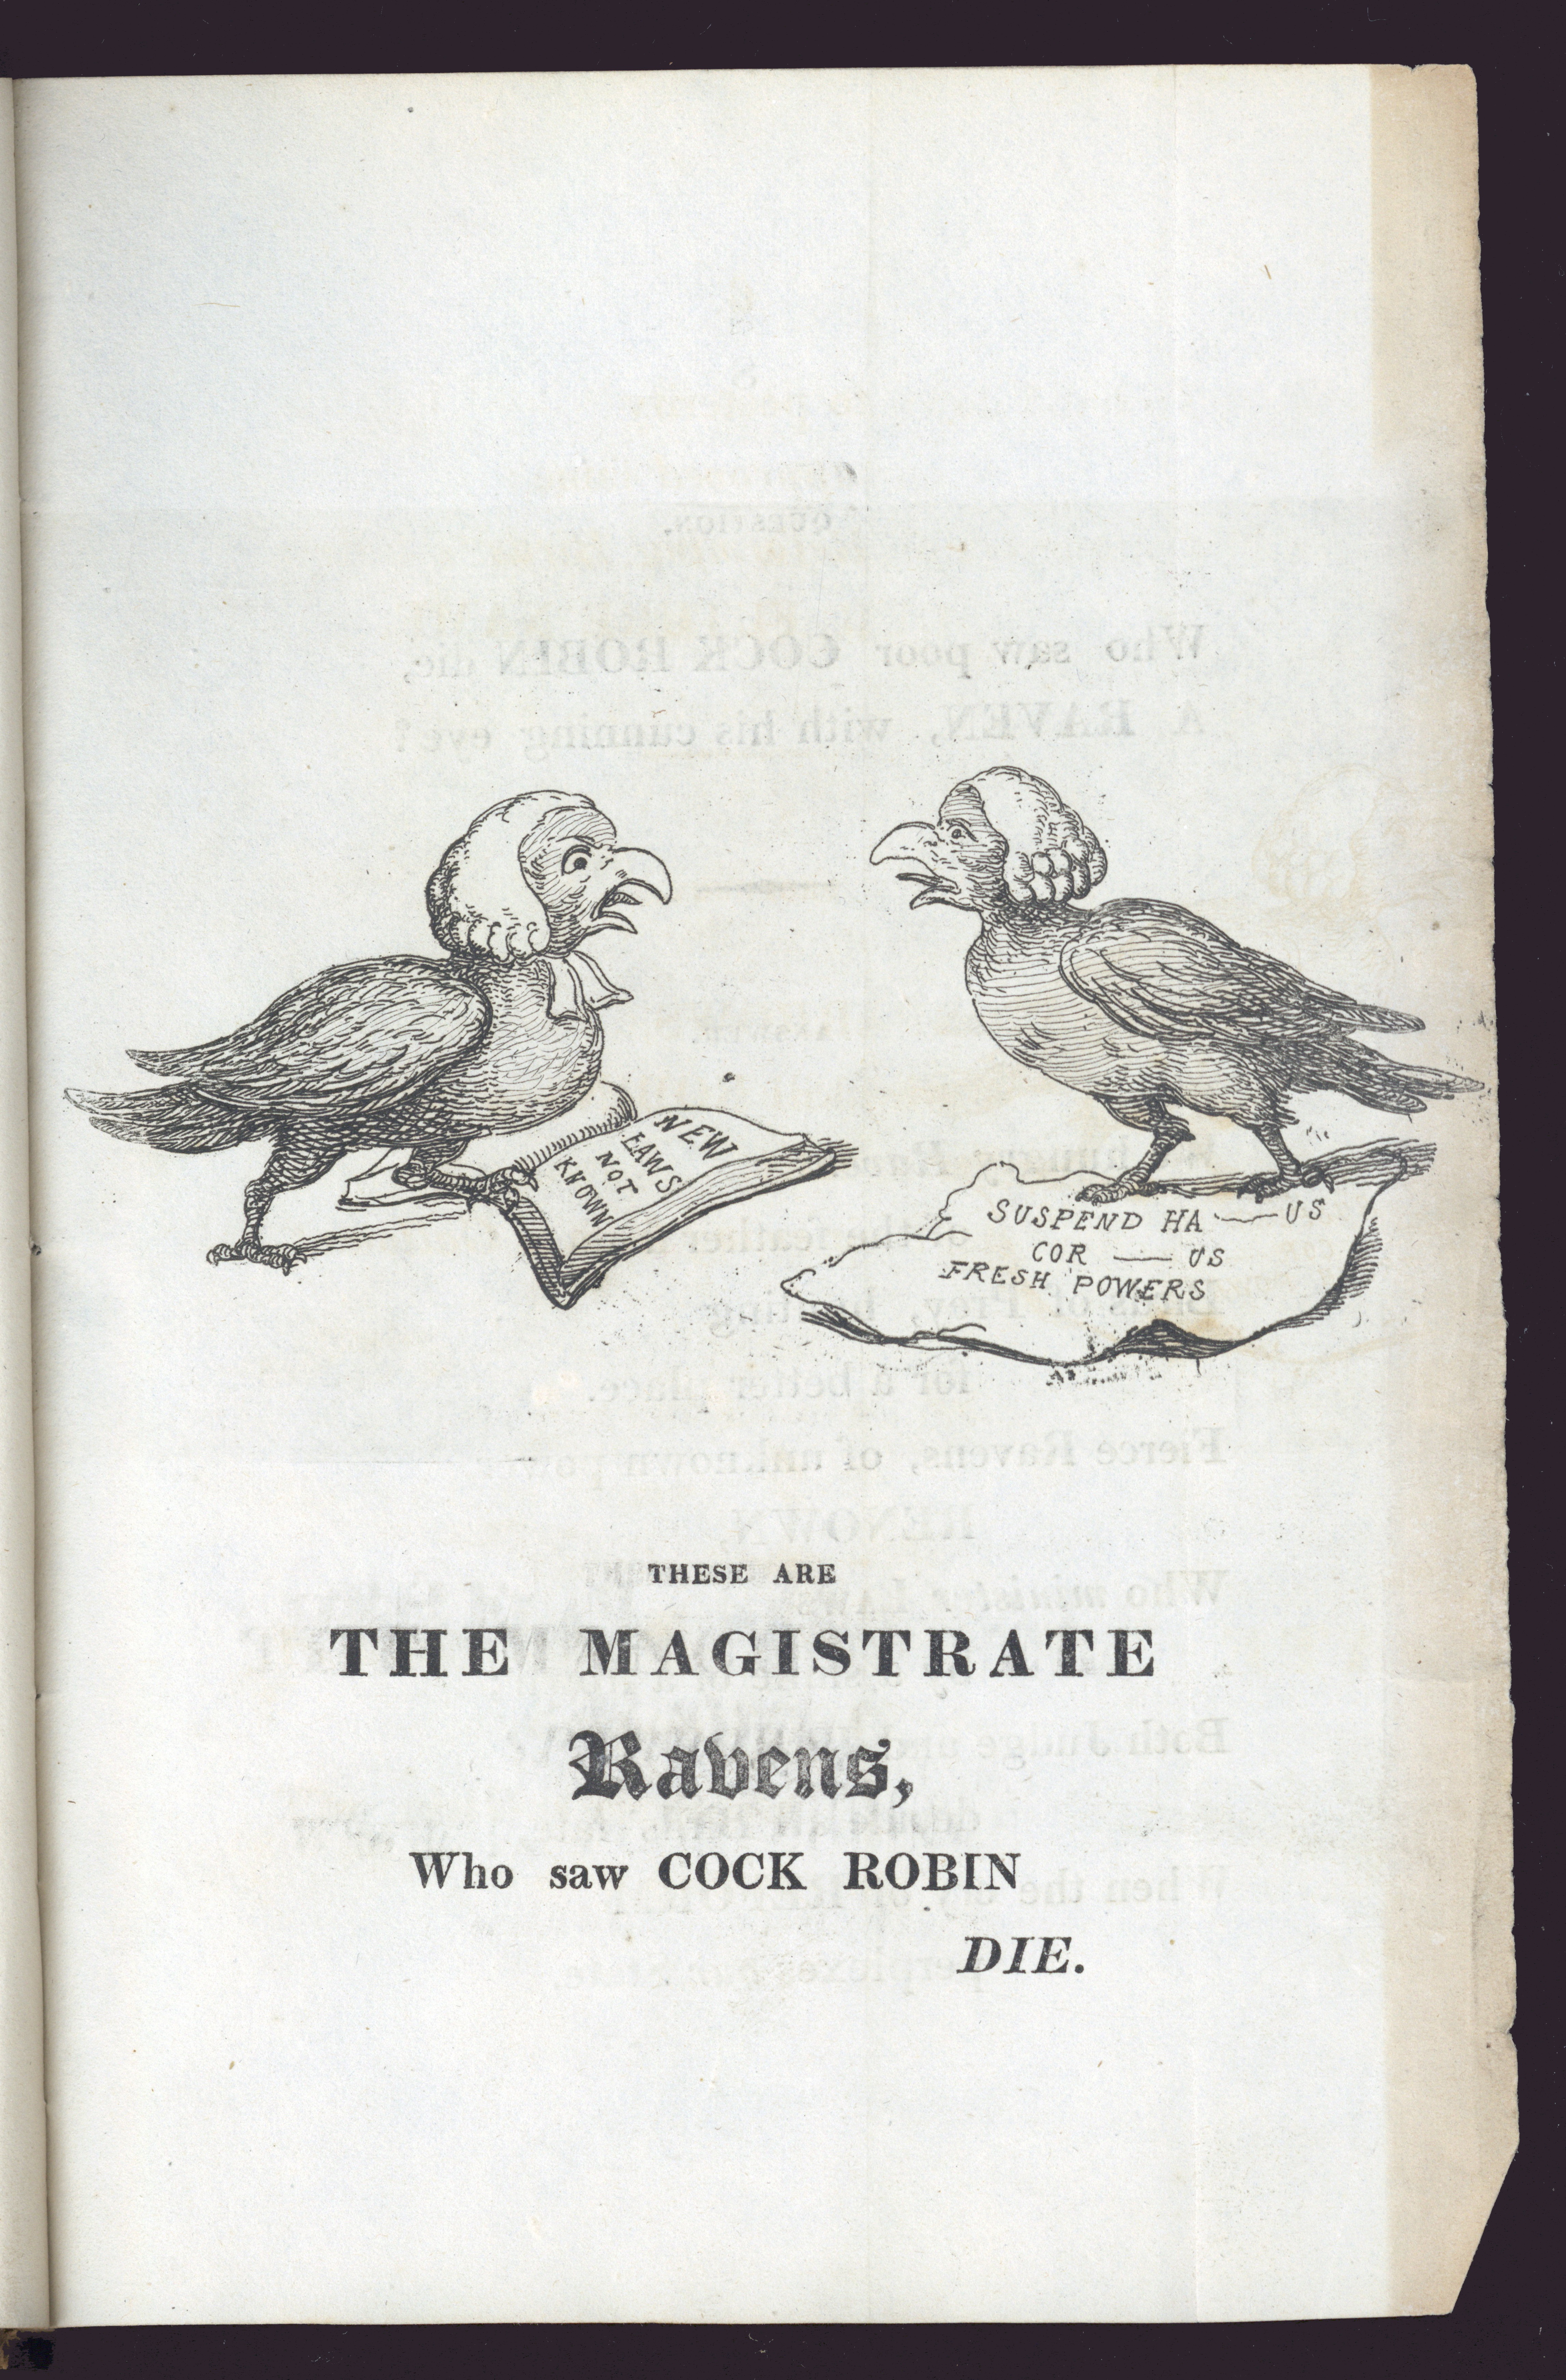 ‘These are the Magistrate Ravens, Who saw Cock Robin die’. From: Who Killed Cock Robin? A Satirical Tragedy, or Hieroglyphic Prophecy on the Manchester Blot!!! (London: John Cahuac, 1819) Cowen Tracts v.136, n.1.